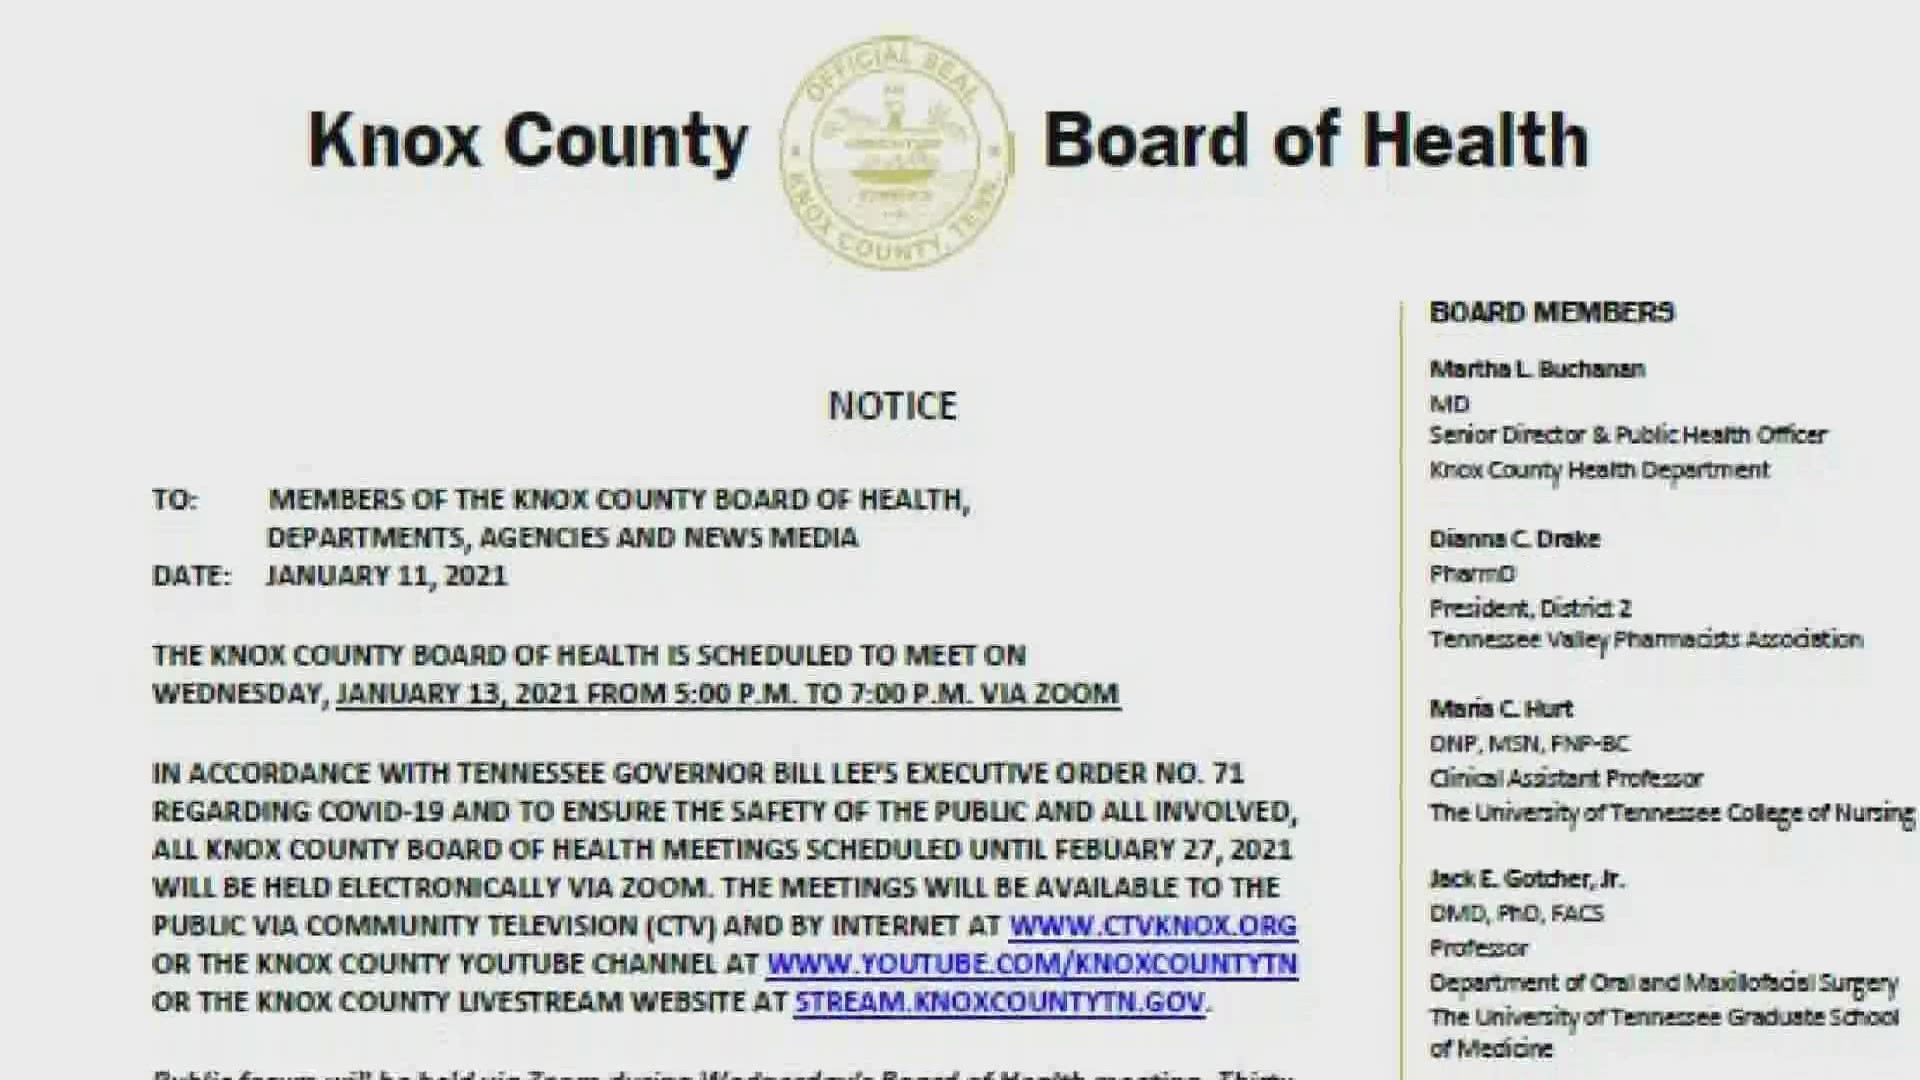 The Knox County Board of Health will meet Wednesday, Jan. 13 at 5 p.m. via Zoom.